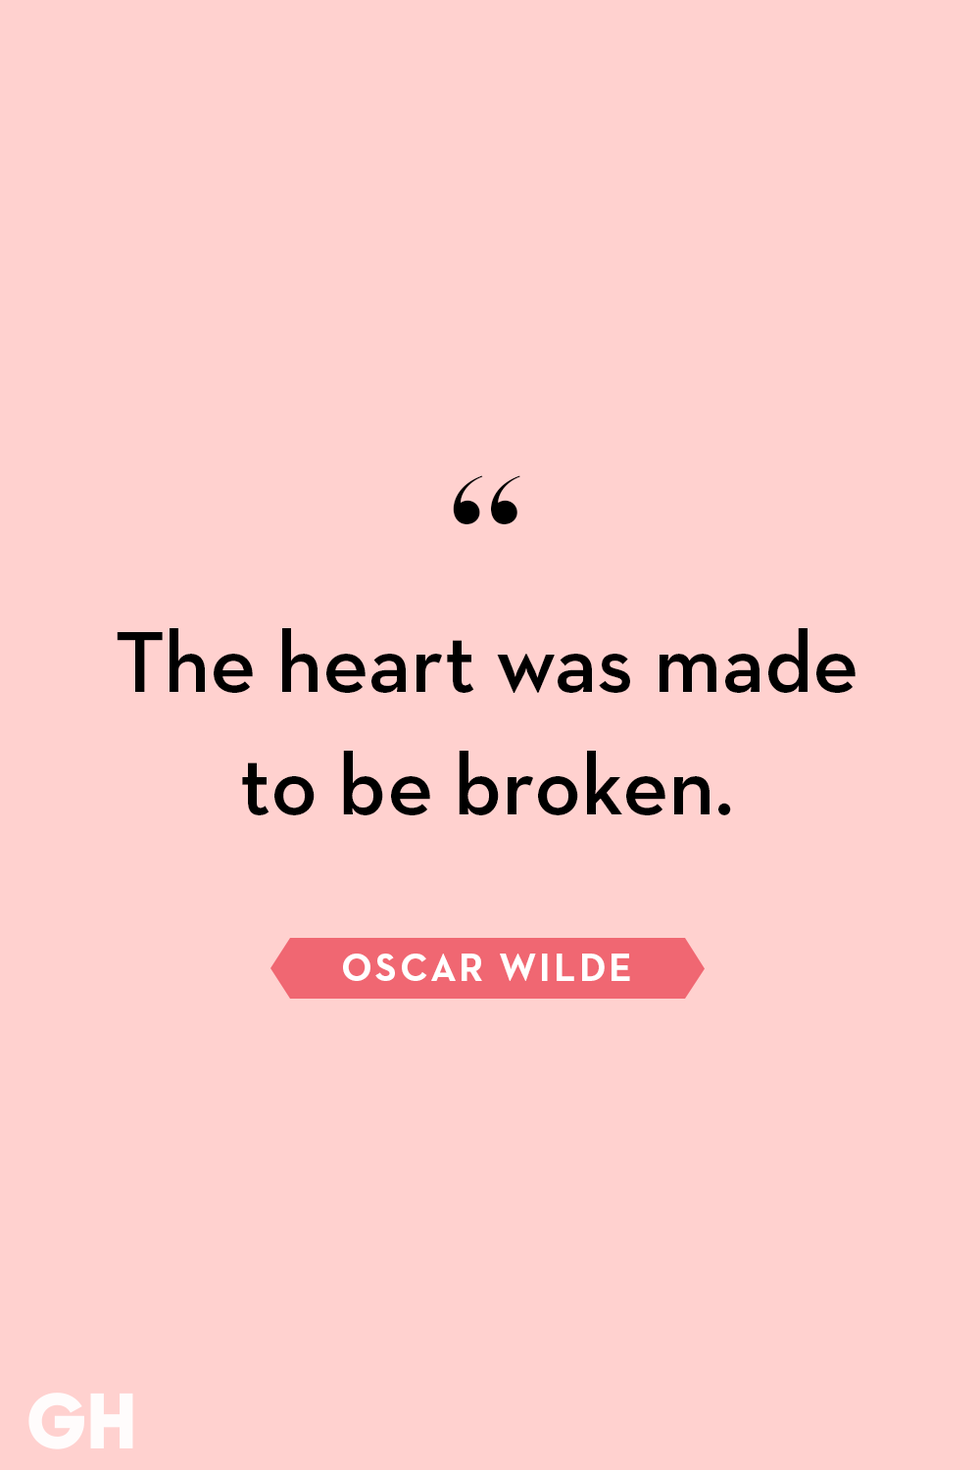 Quotes About Broken Hearts - Sayings for the Brokenhearted